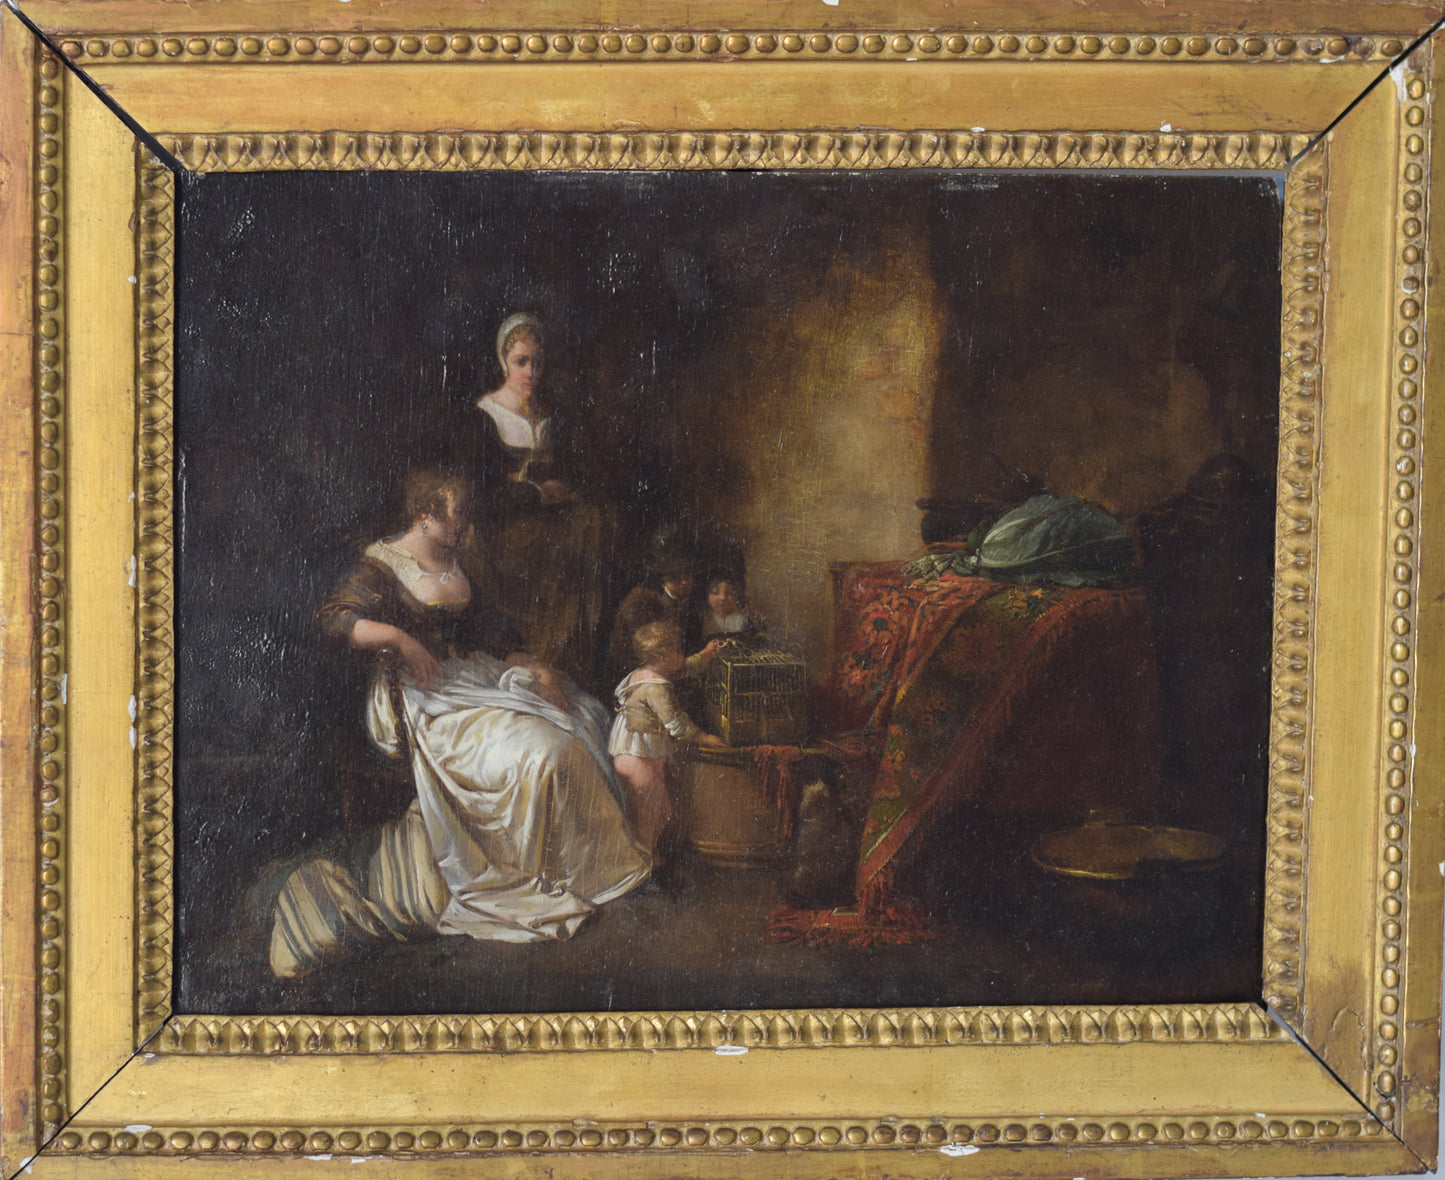 Late 18th Century Domestic scene with children feeding a bird in a cage with mother and maid_Framed